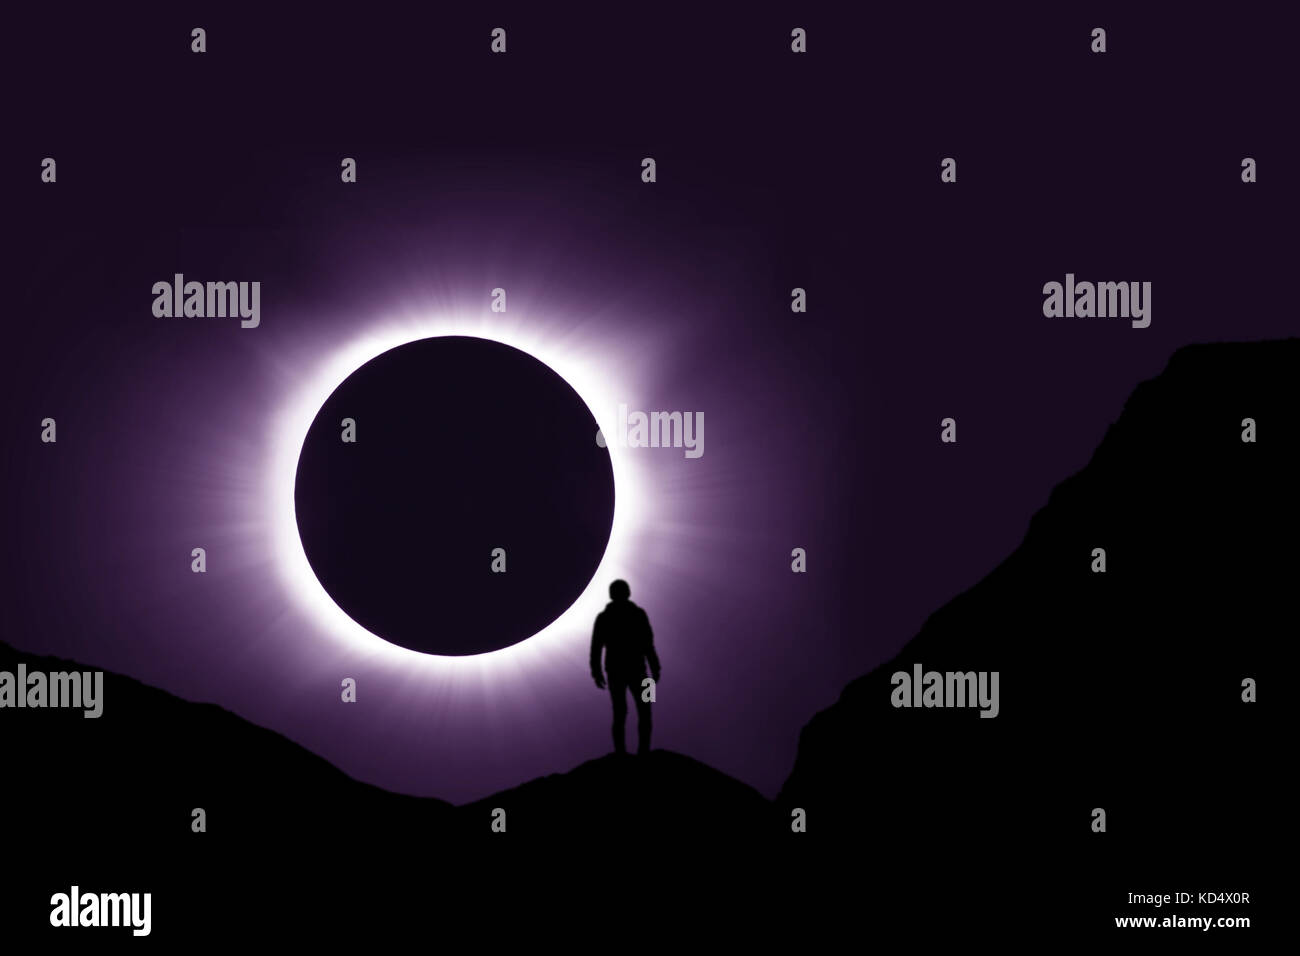 Full Solar Eclipse With Man Standing On Mountain In Foreground Stock Photo